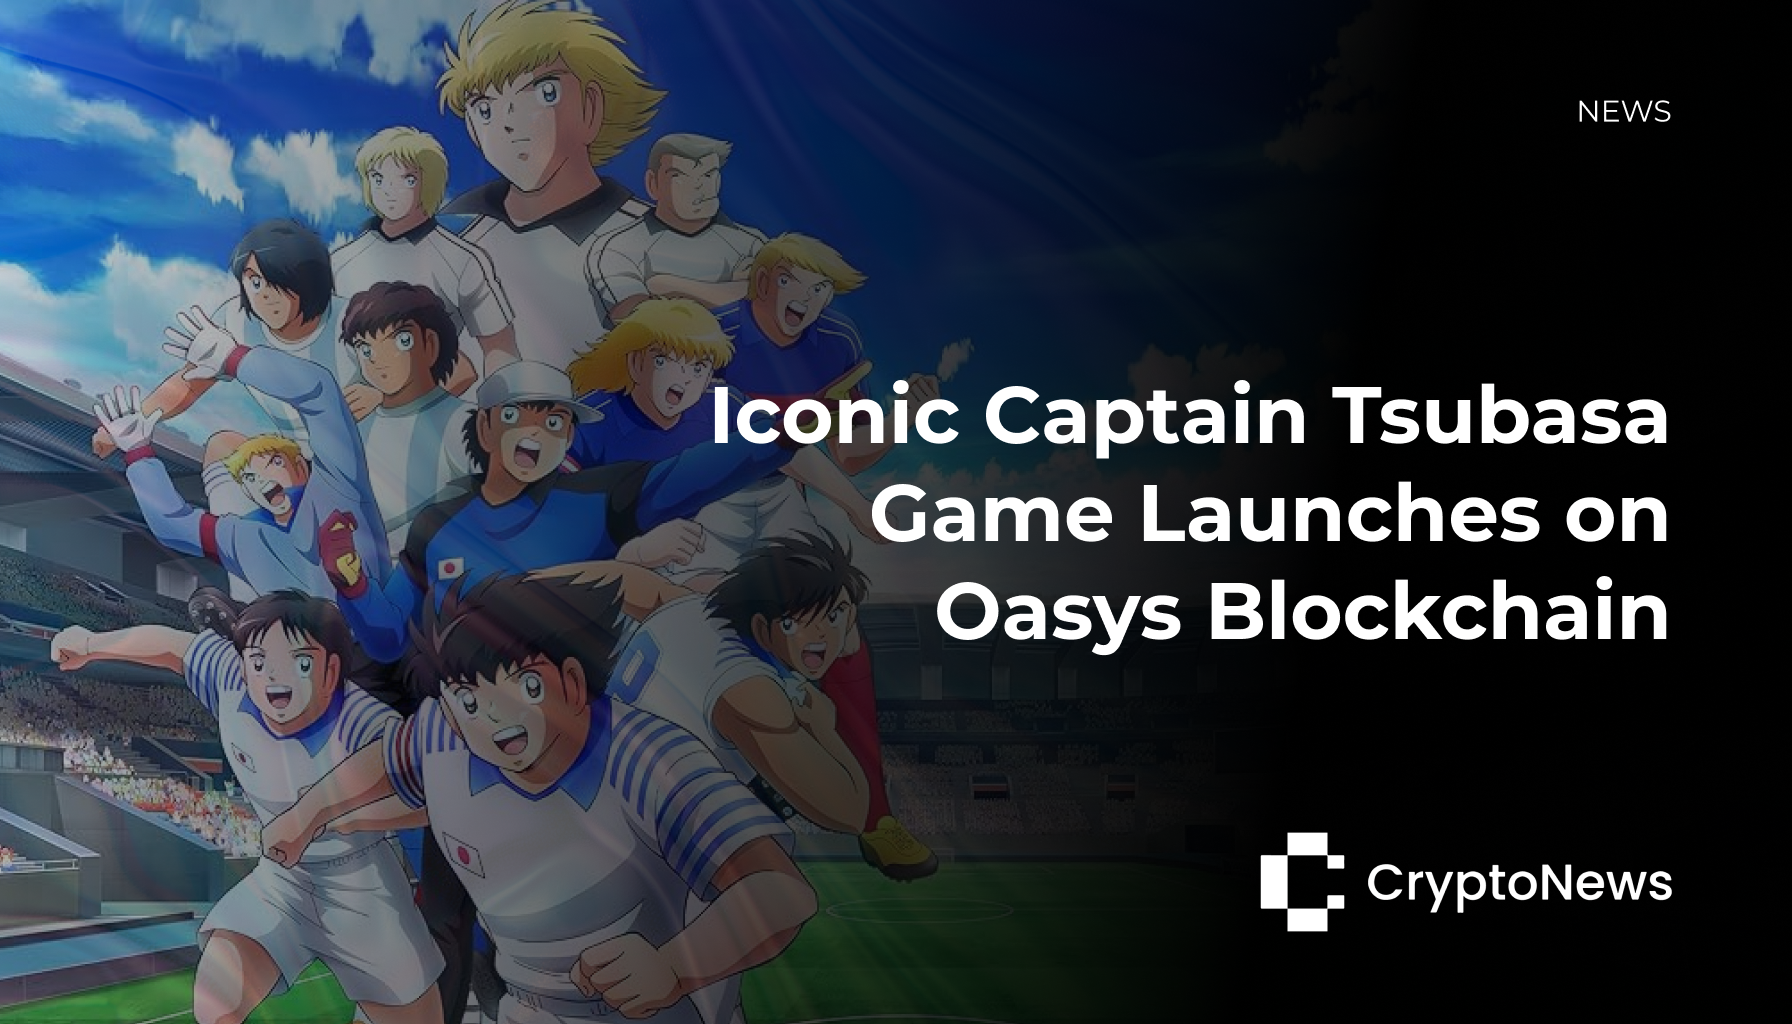 Characters from the Captain Tsubasa series in a dynamic pose, promoting the launch of the game on Oasys Blockchain. The text reads "Iconic Captain Tsubasa Game Launches on Oasys Blockchain" with the CryptoNews logo.